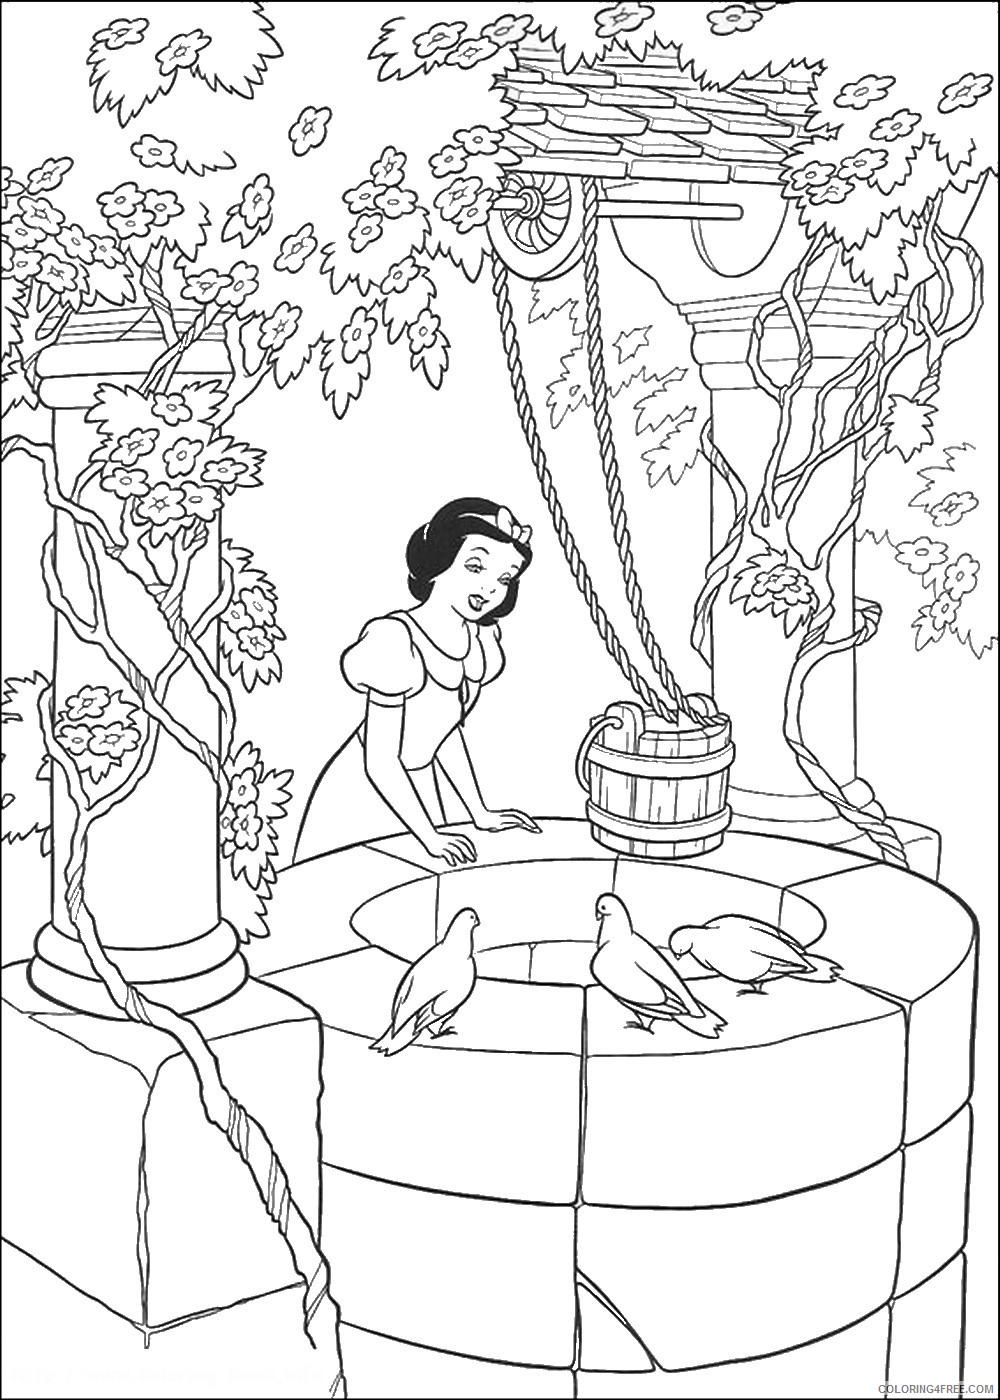 Snow White Coloring Pages Cartoons snow_white_cl_69 Printable 2020 5744 Coloring4free